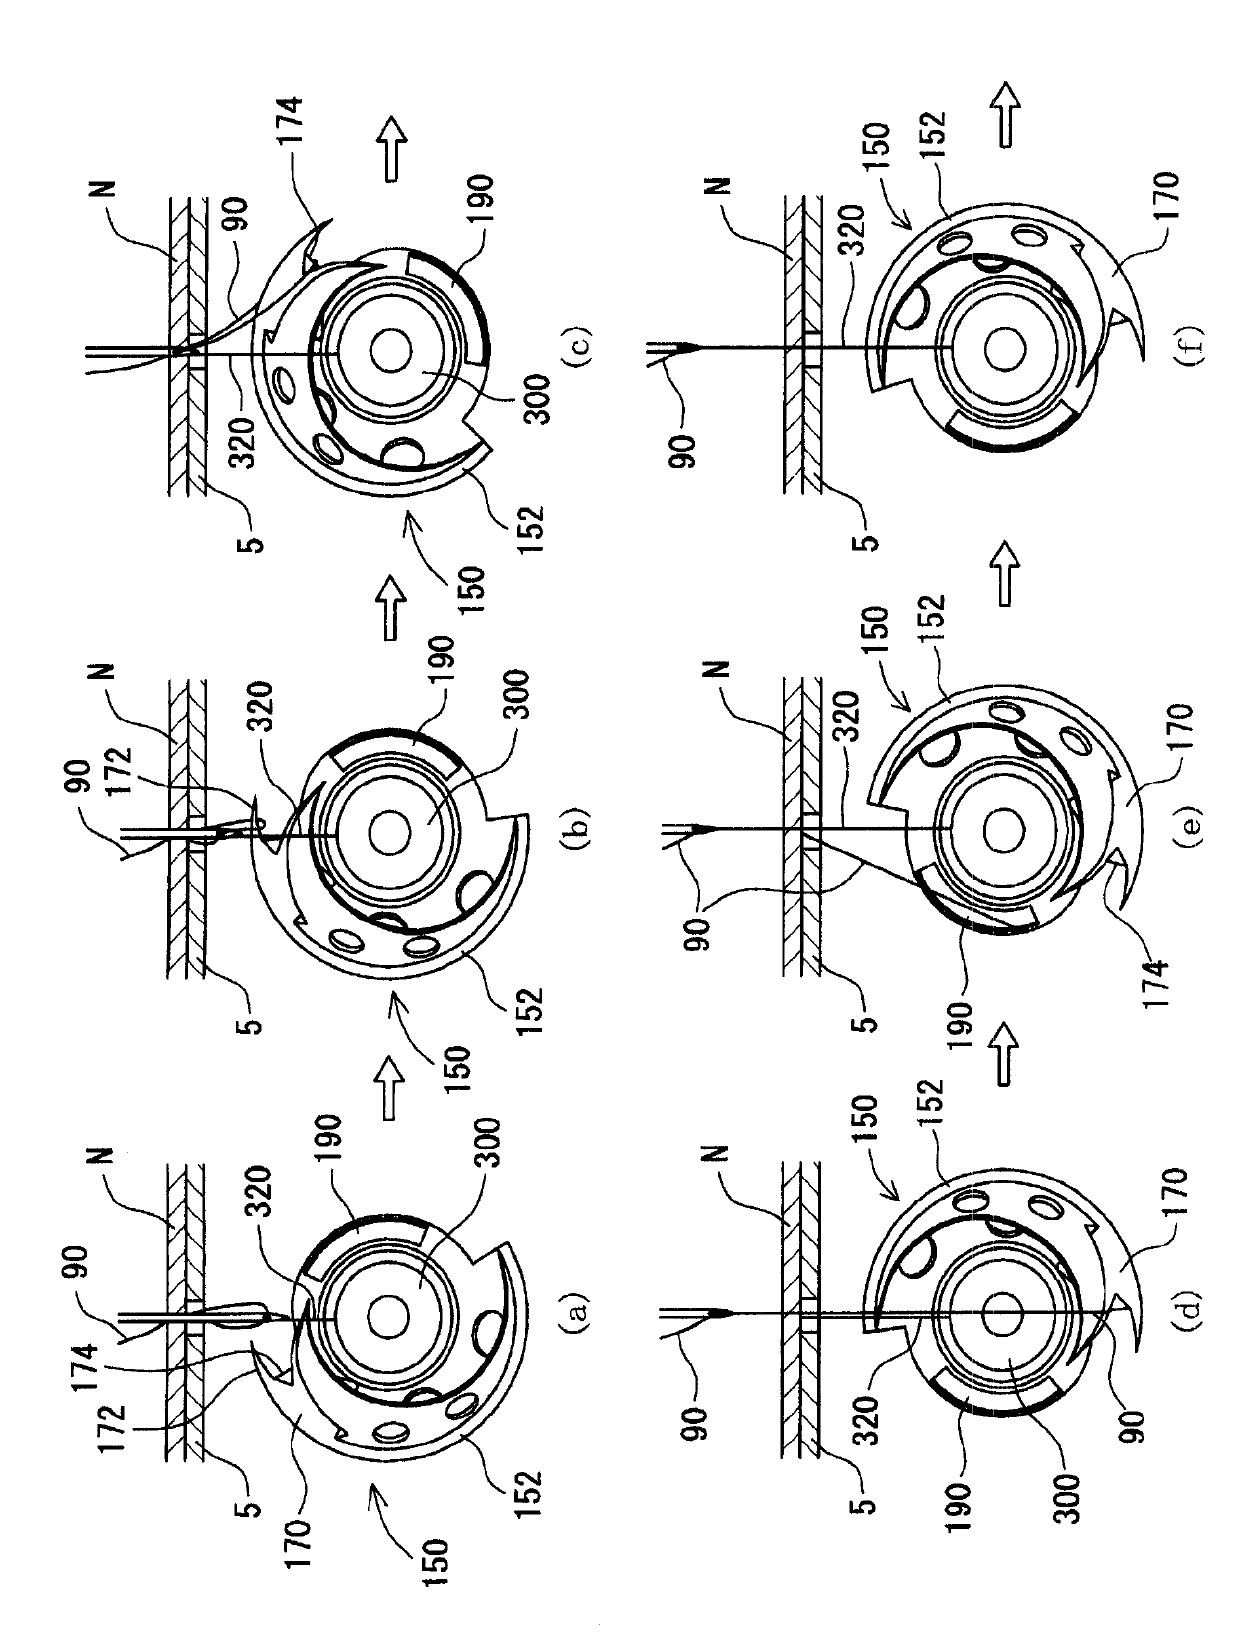 Lower-thread tension control device for sewing machine, and sewing machine